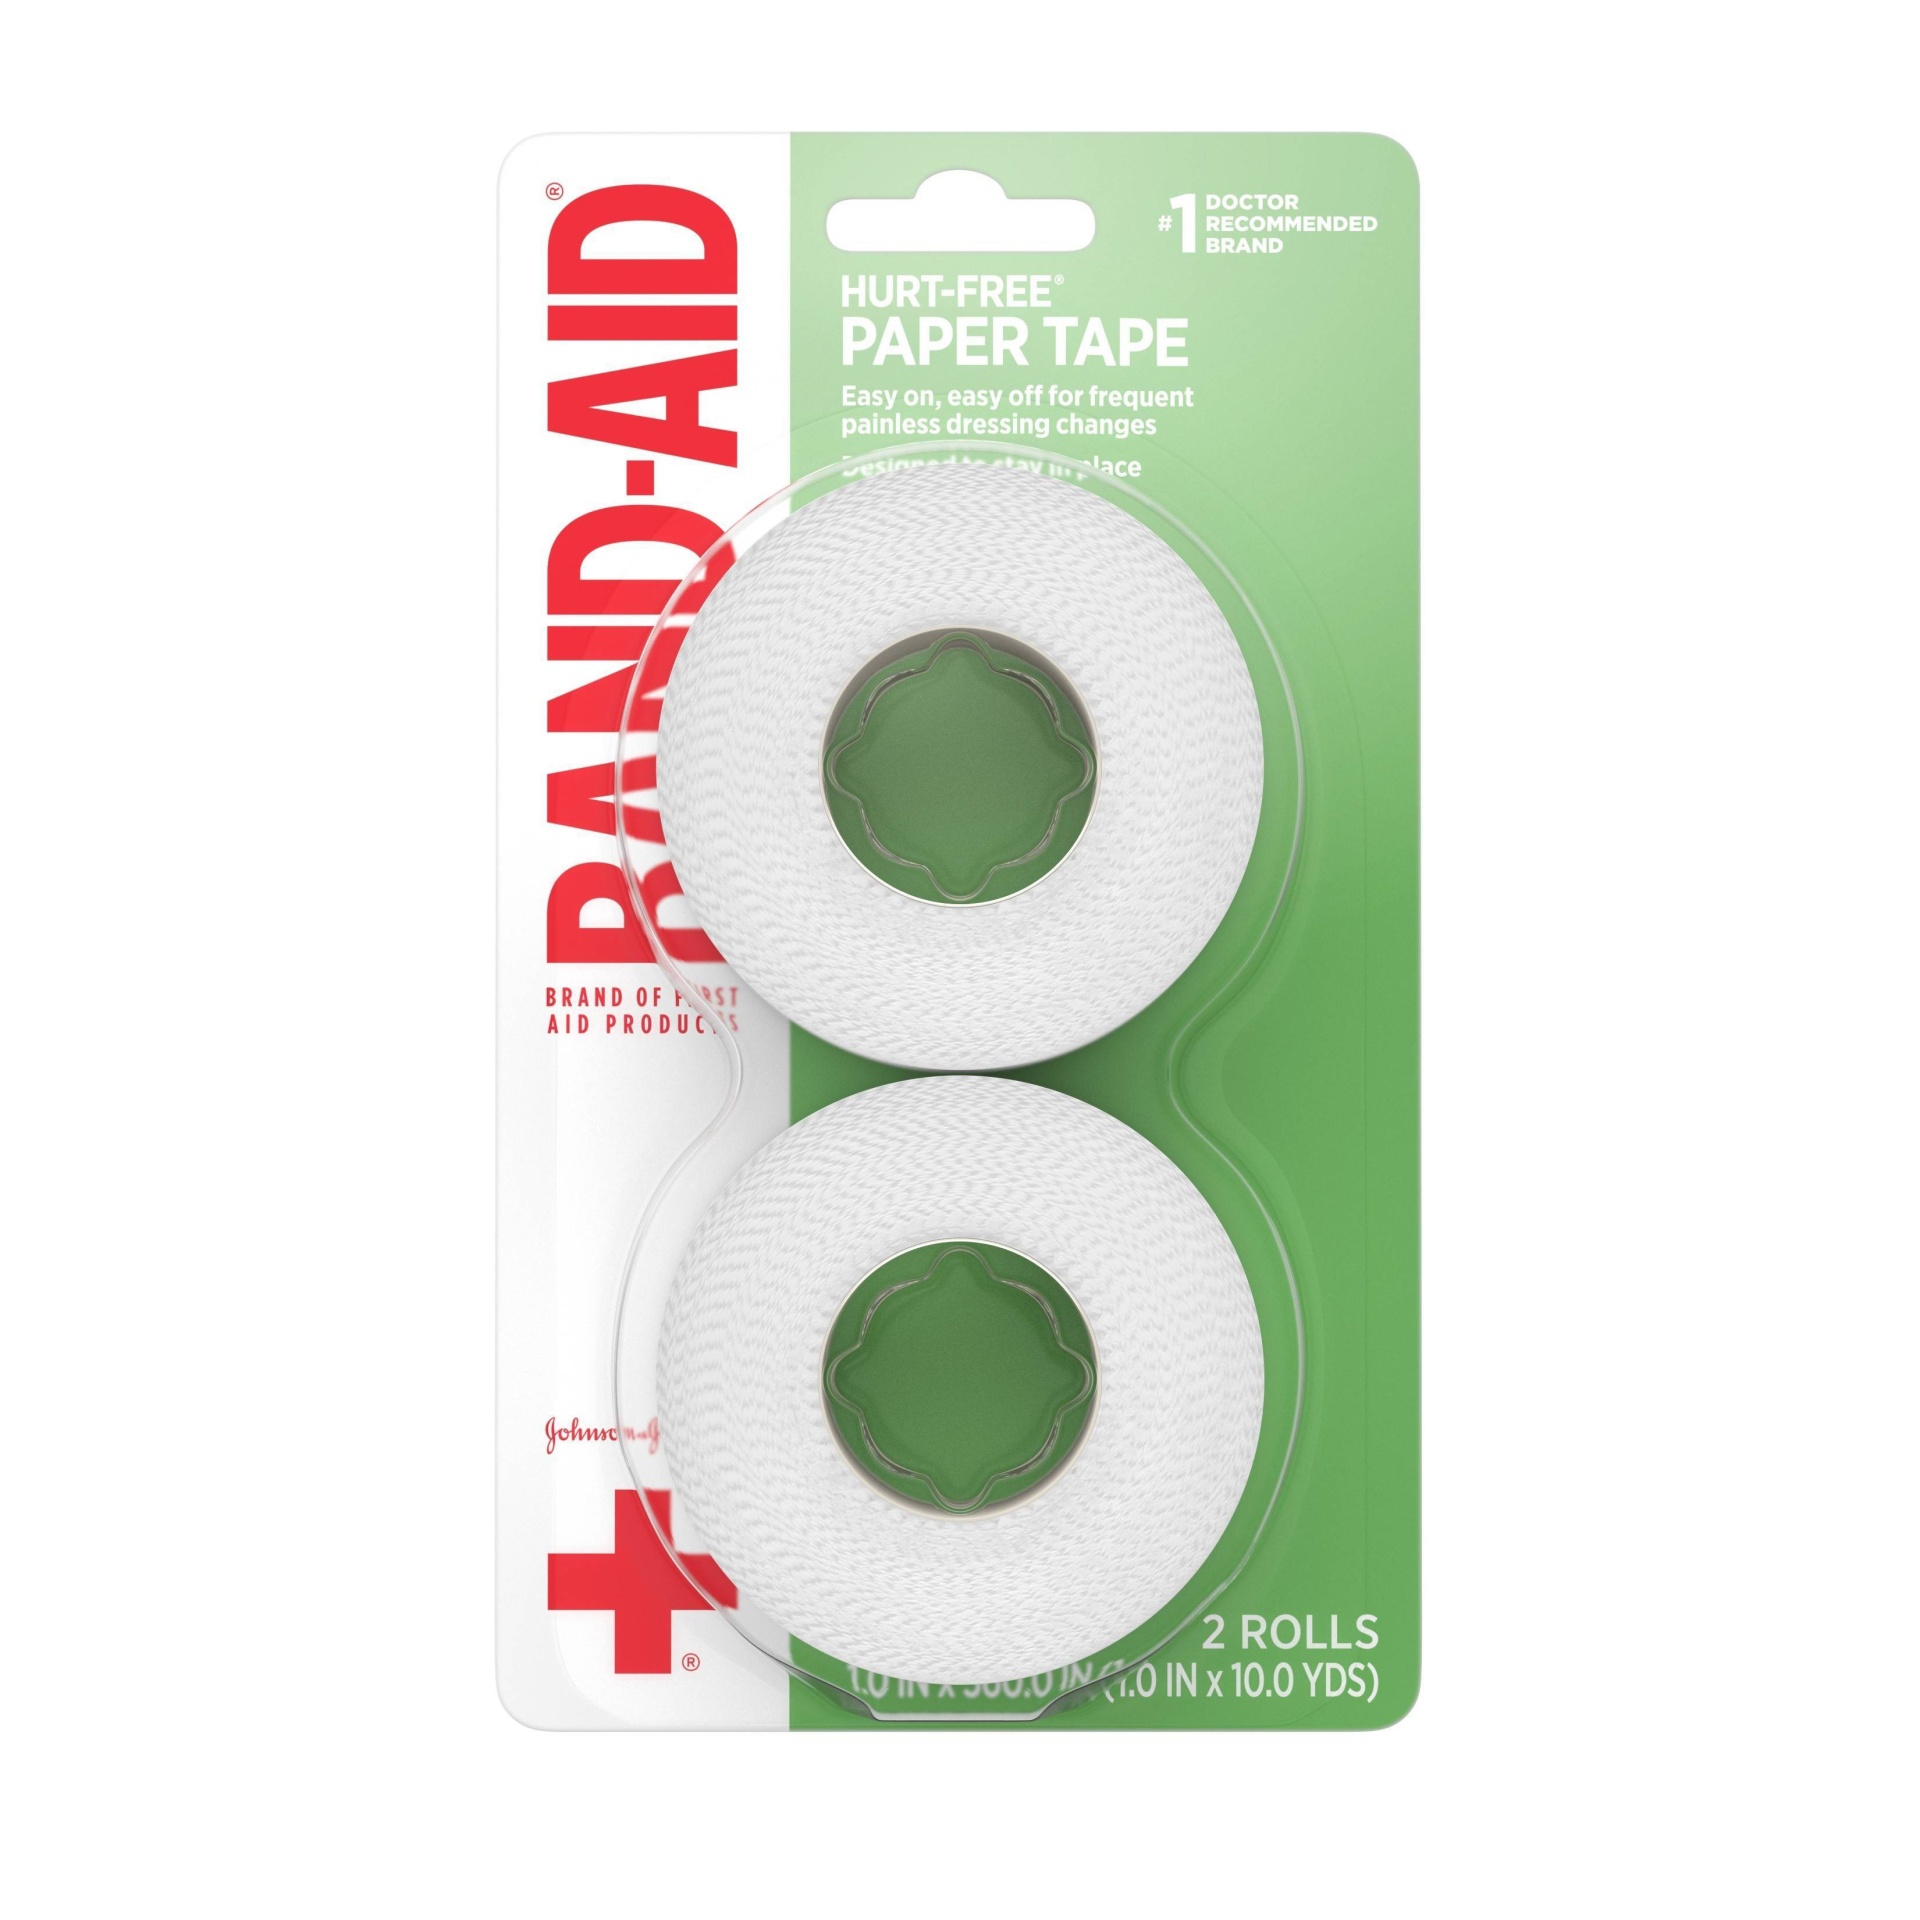 slide 1 of 8, Band-Aid Band Aid Brand of First Aid Products Hurt Free Paper Tape - 20yds, 1 ct